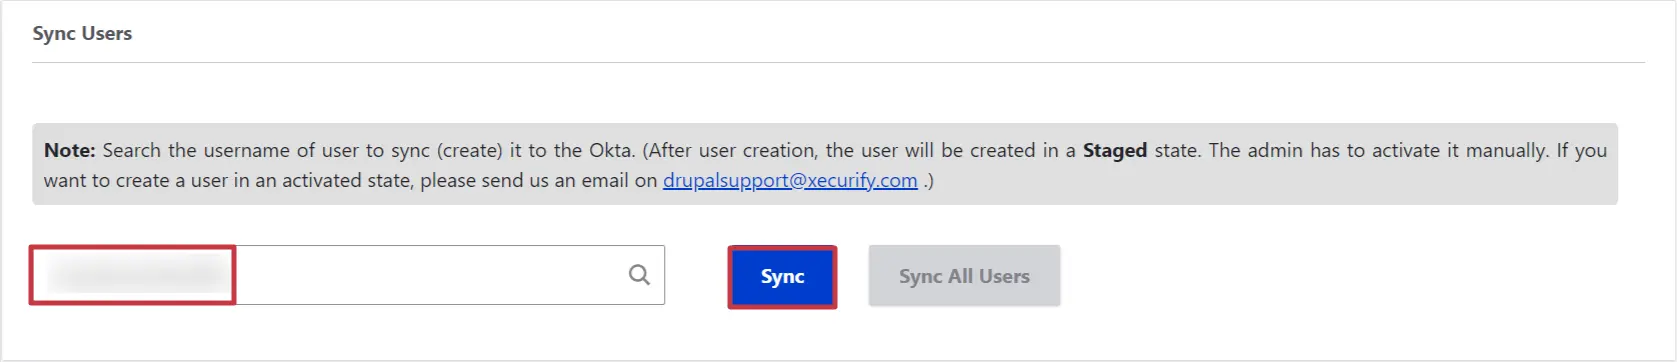 you can find the sync users, in the search field you can enter the user name of drupal user